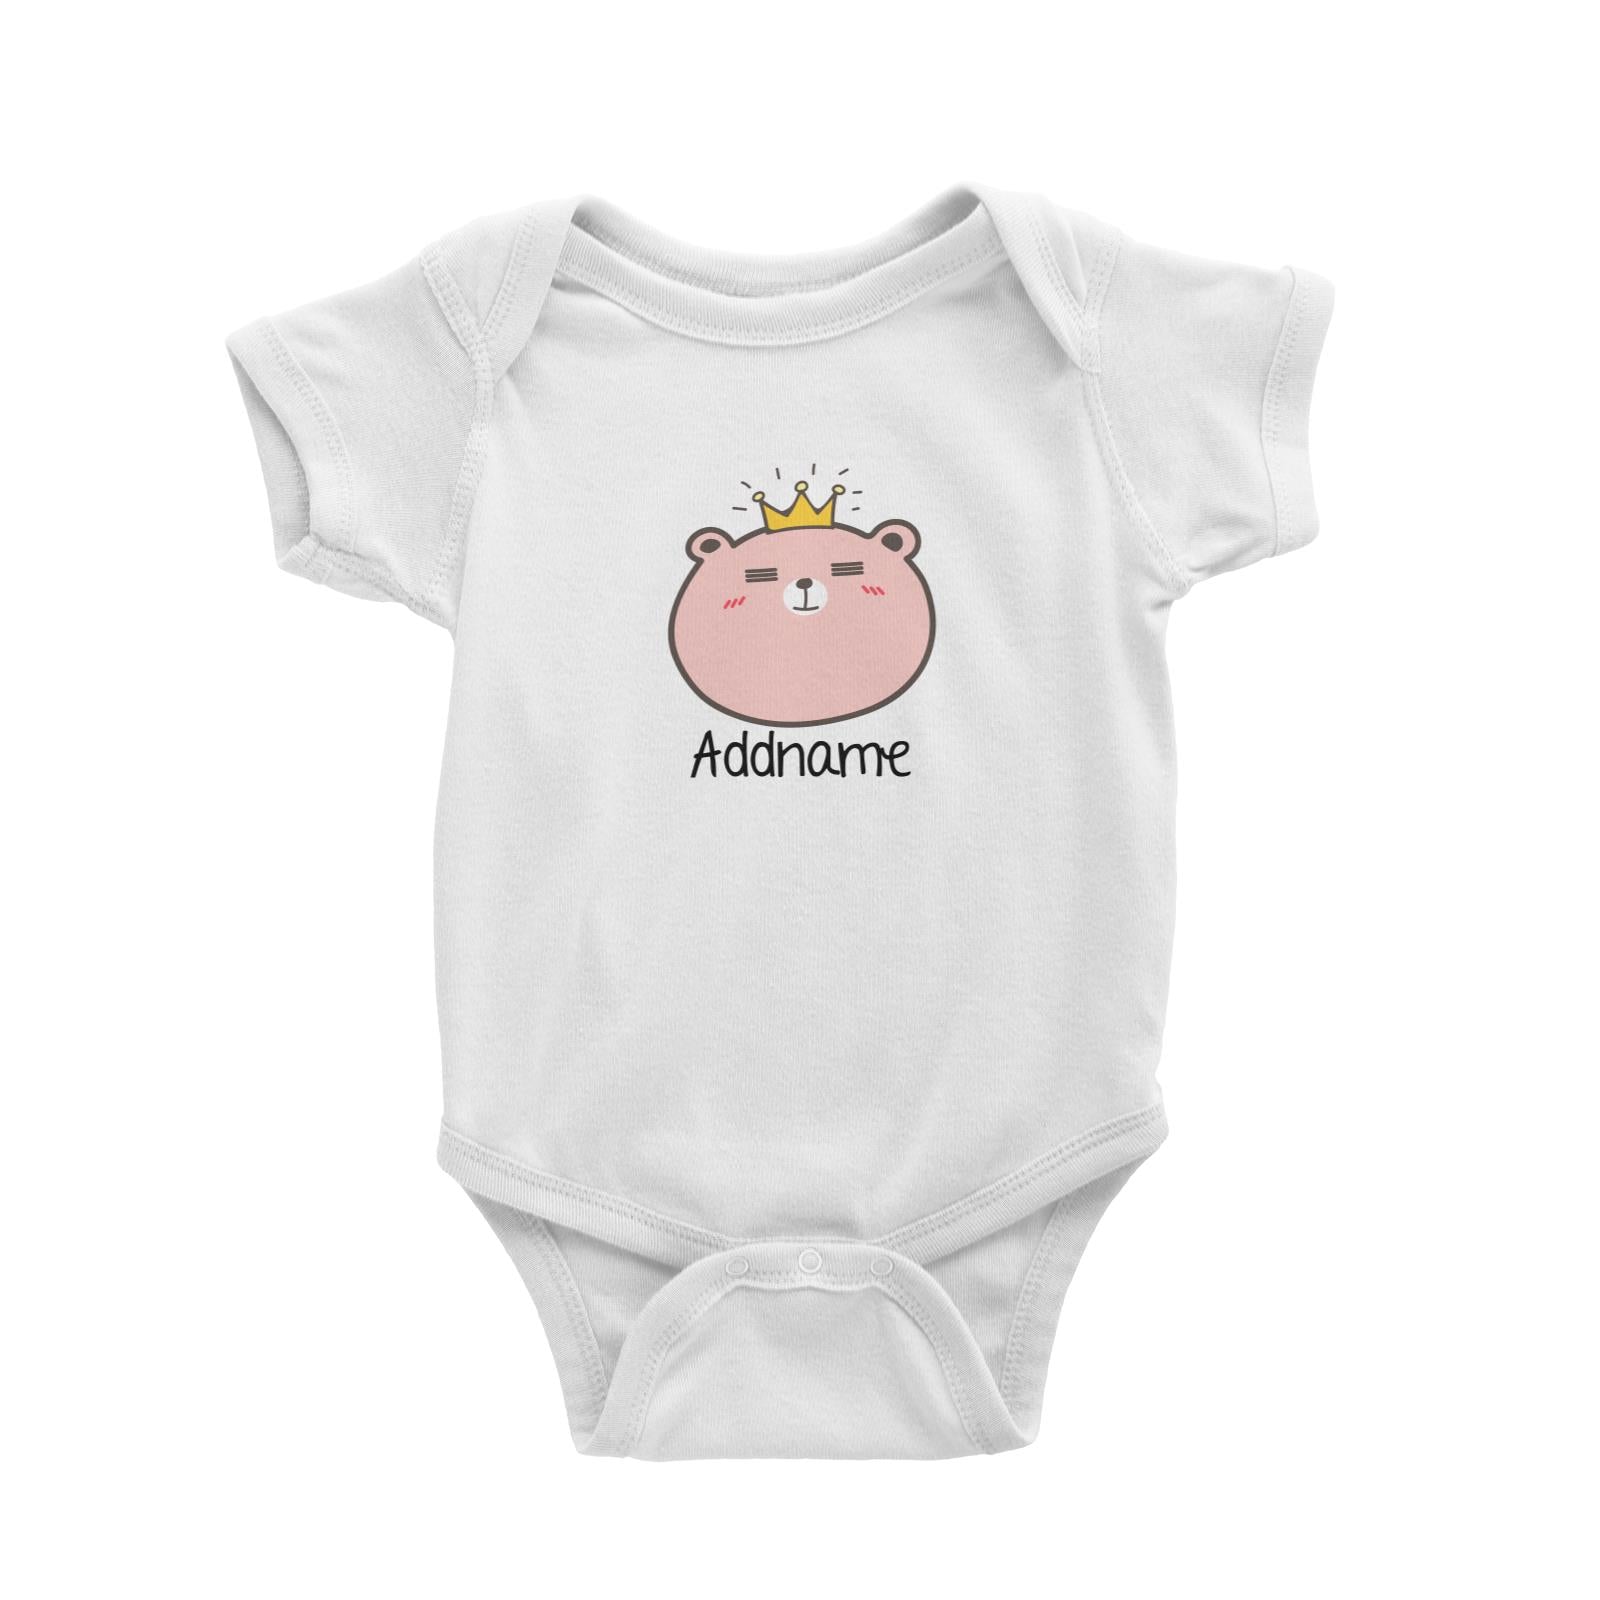 Cute Animals And Friends Series Cute Pink Bear With Crown Addname Baby Romper